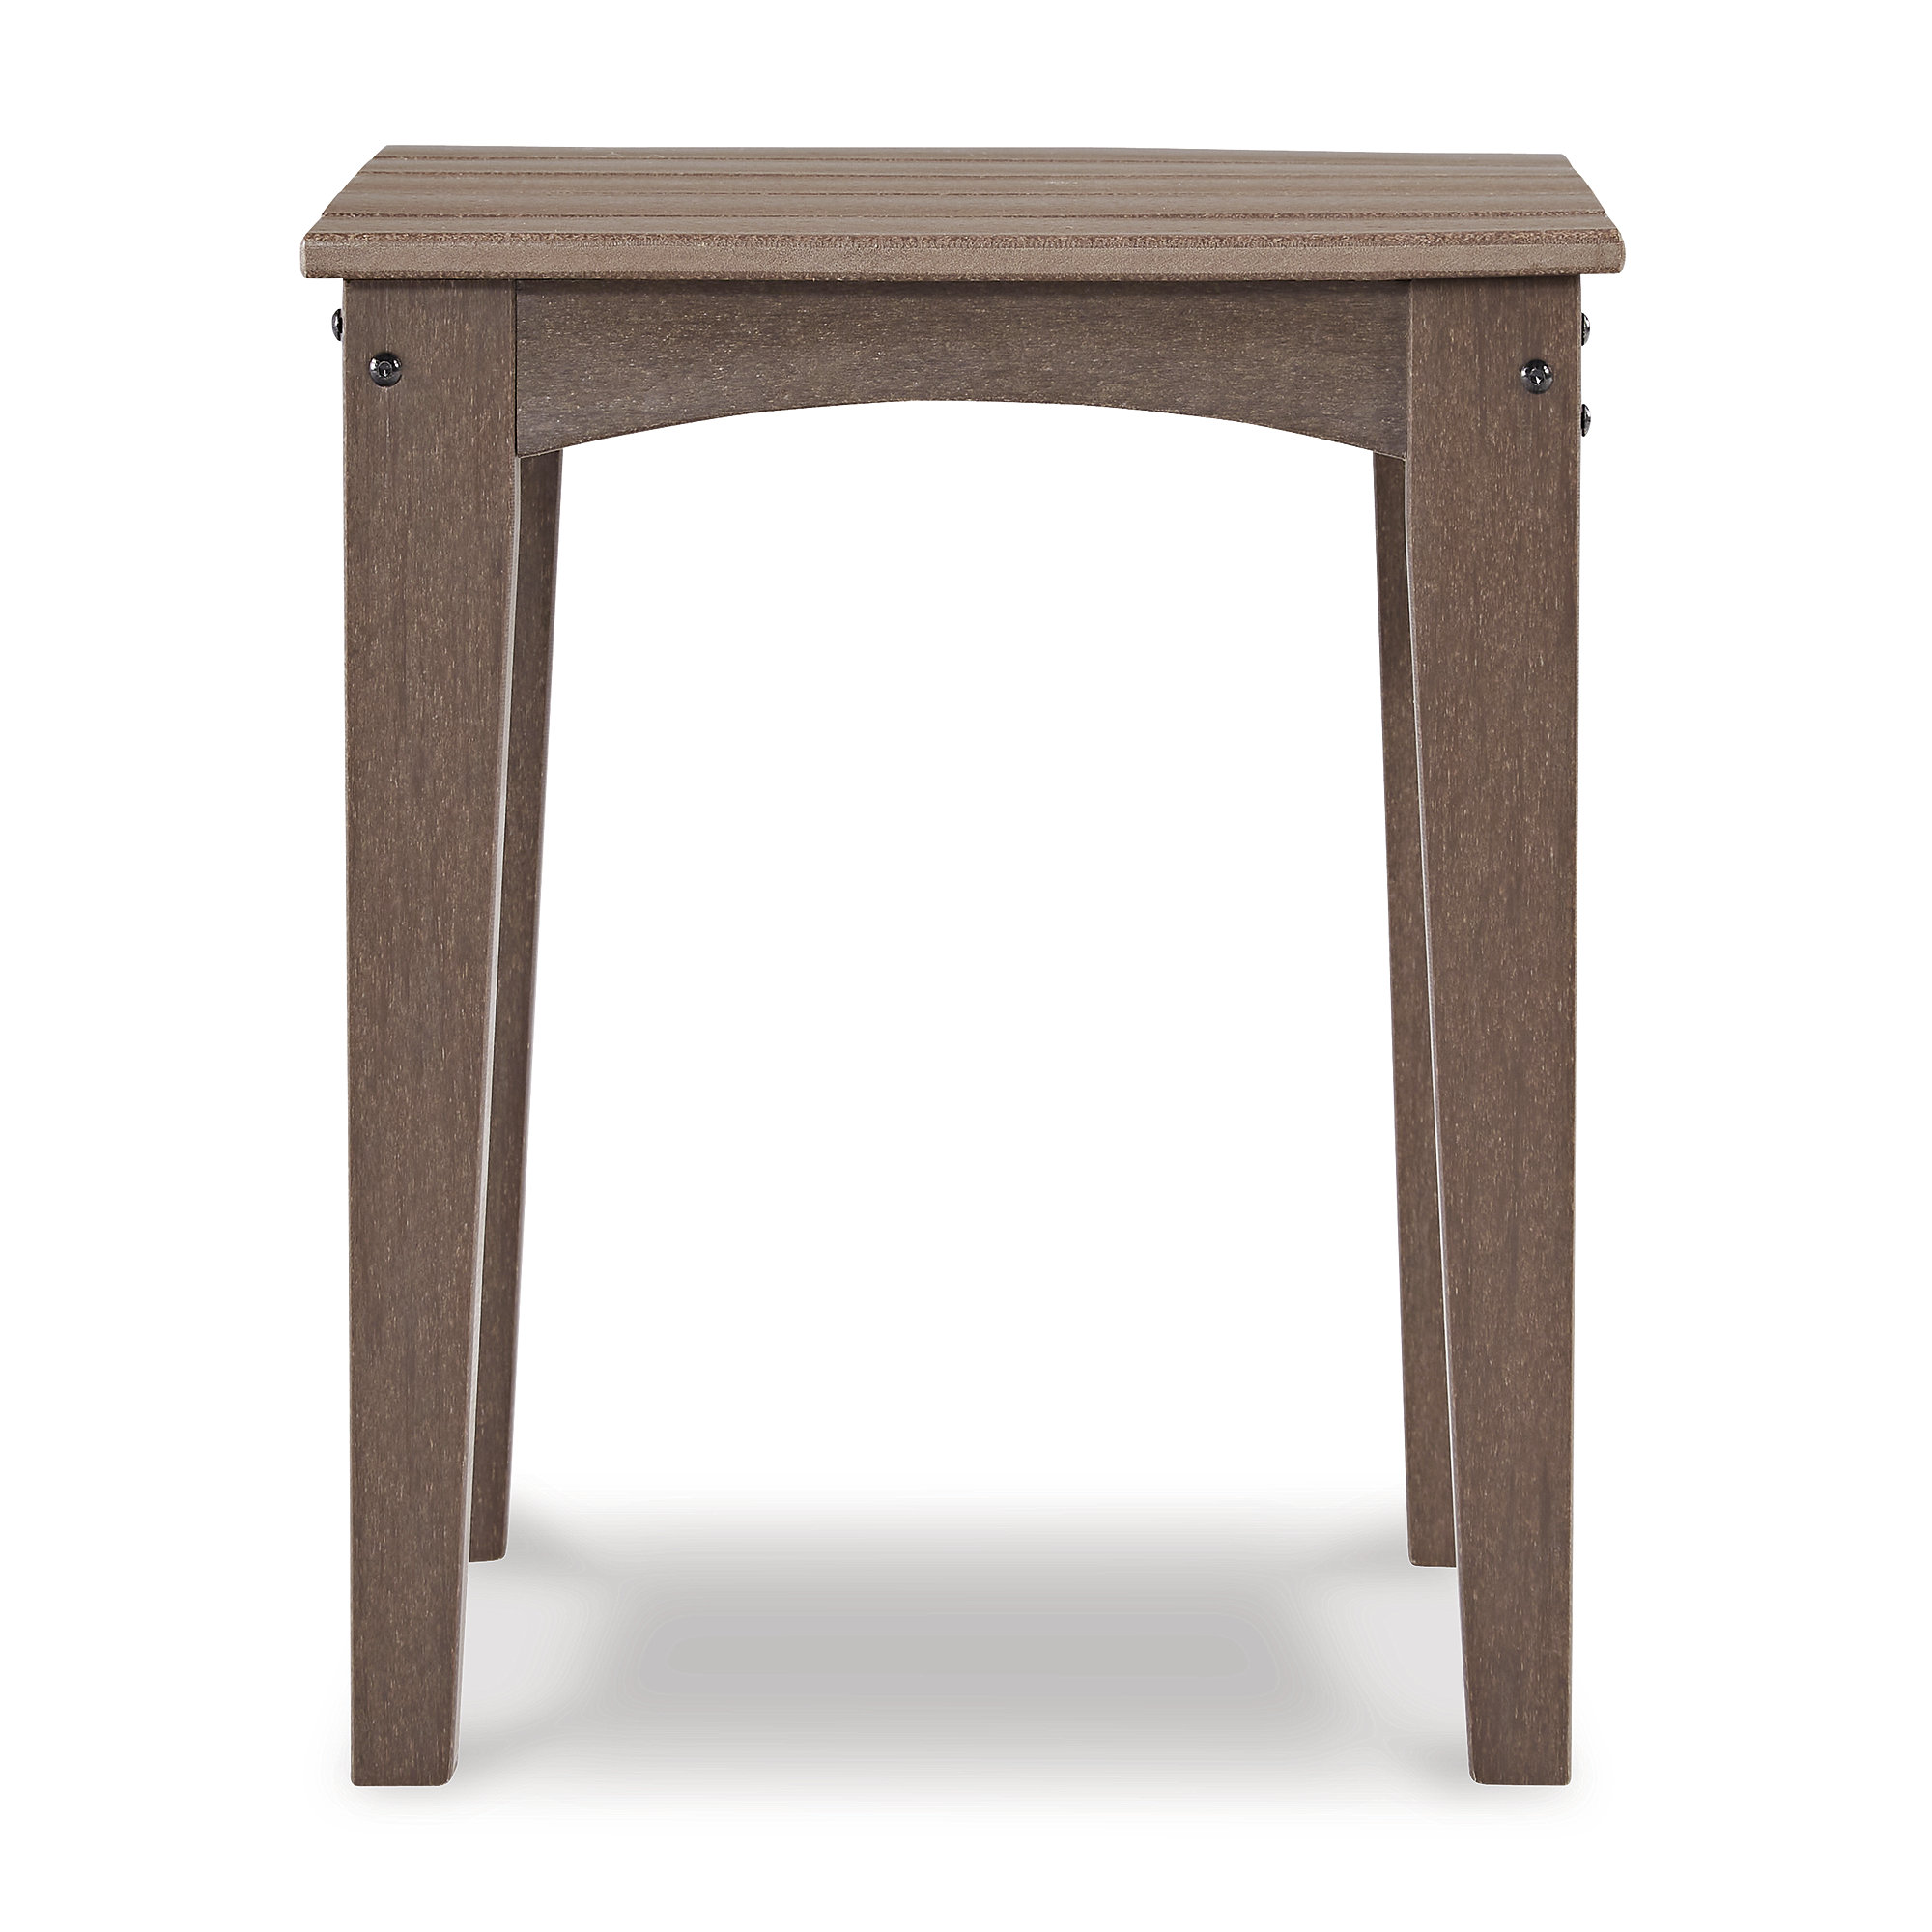 Signature Design by Ashley Casual Emmeline Outdoor HDPE Patio End Table, Brown - image 3 of 5